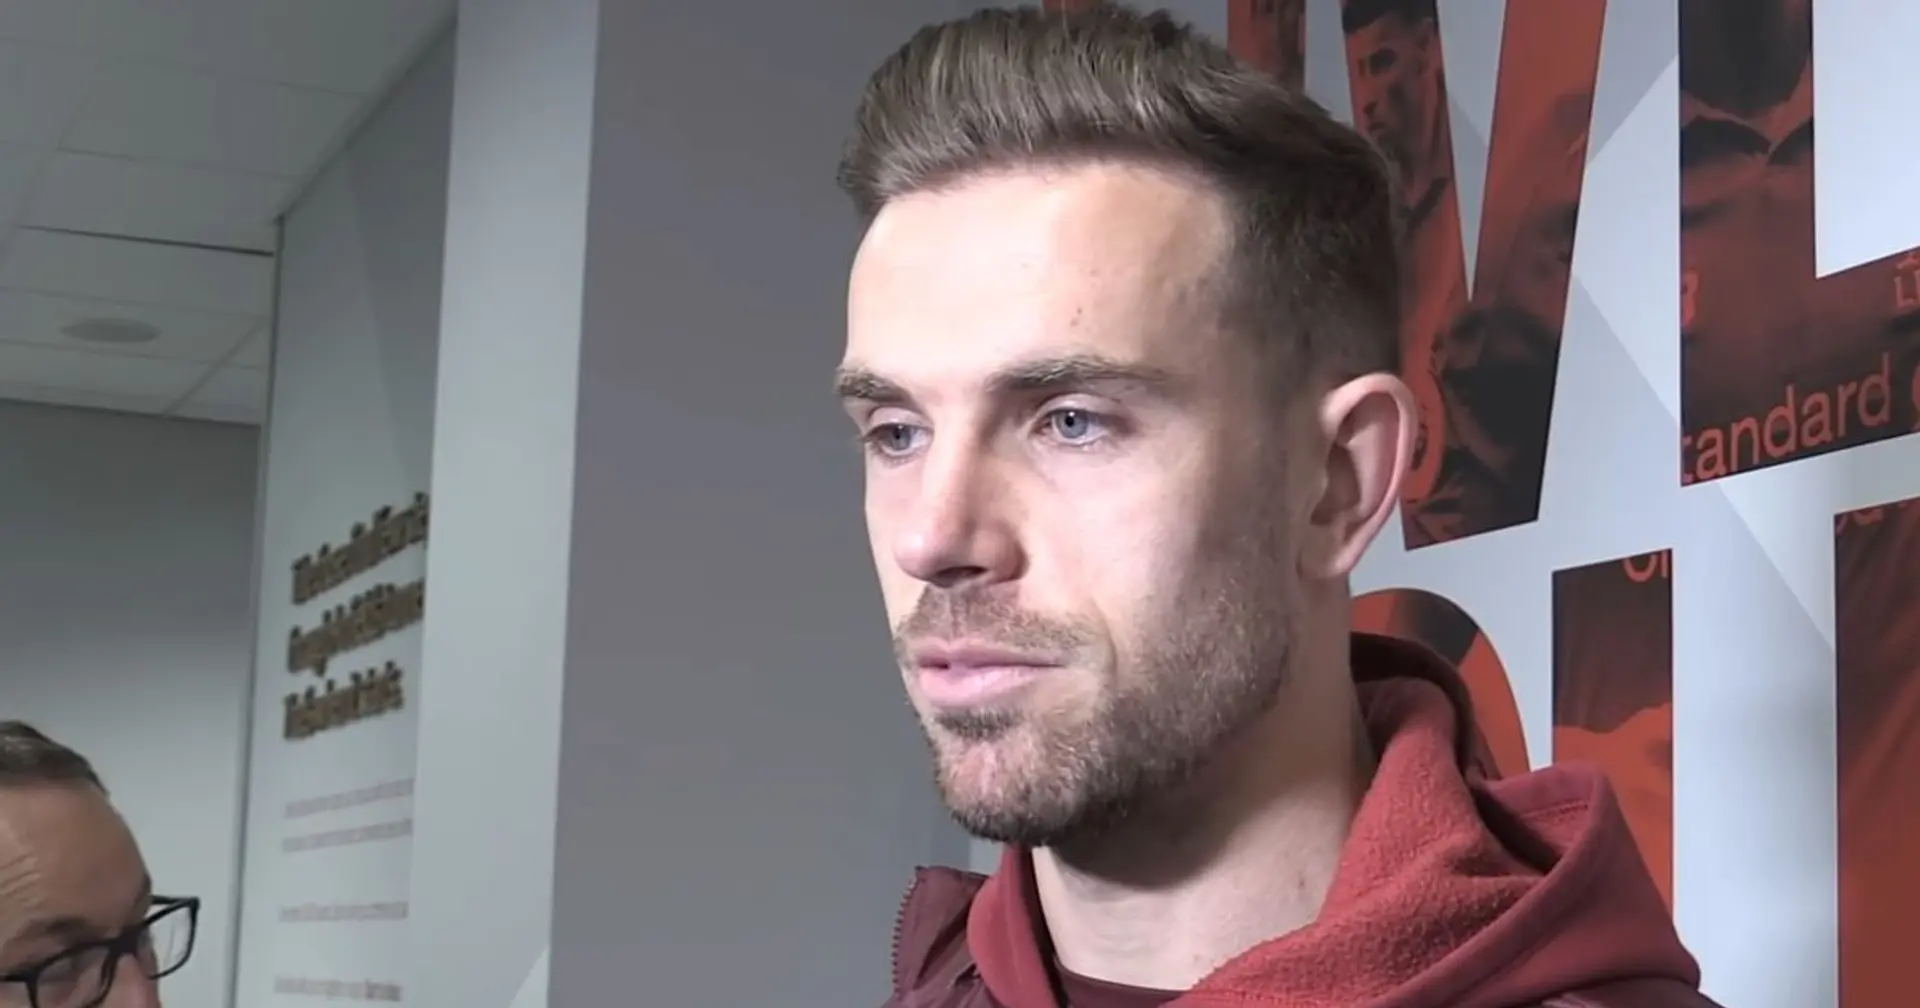 Jordan Henderson sends teammates message after 'real low point' for Liverpool